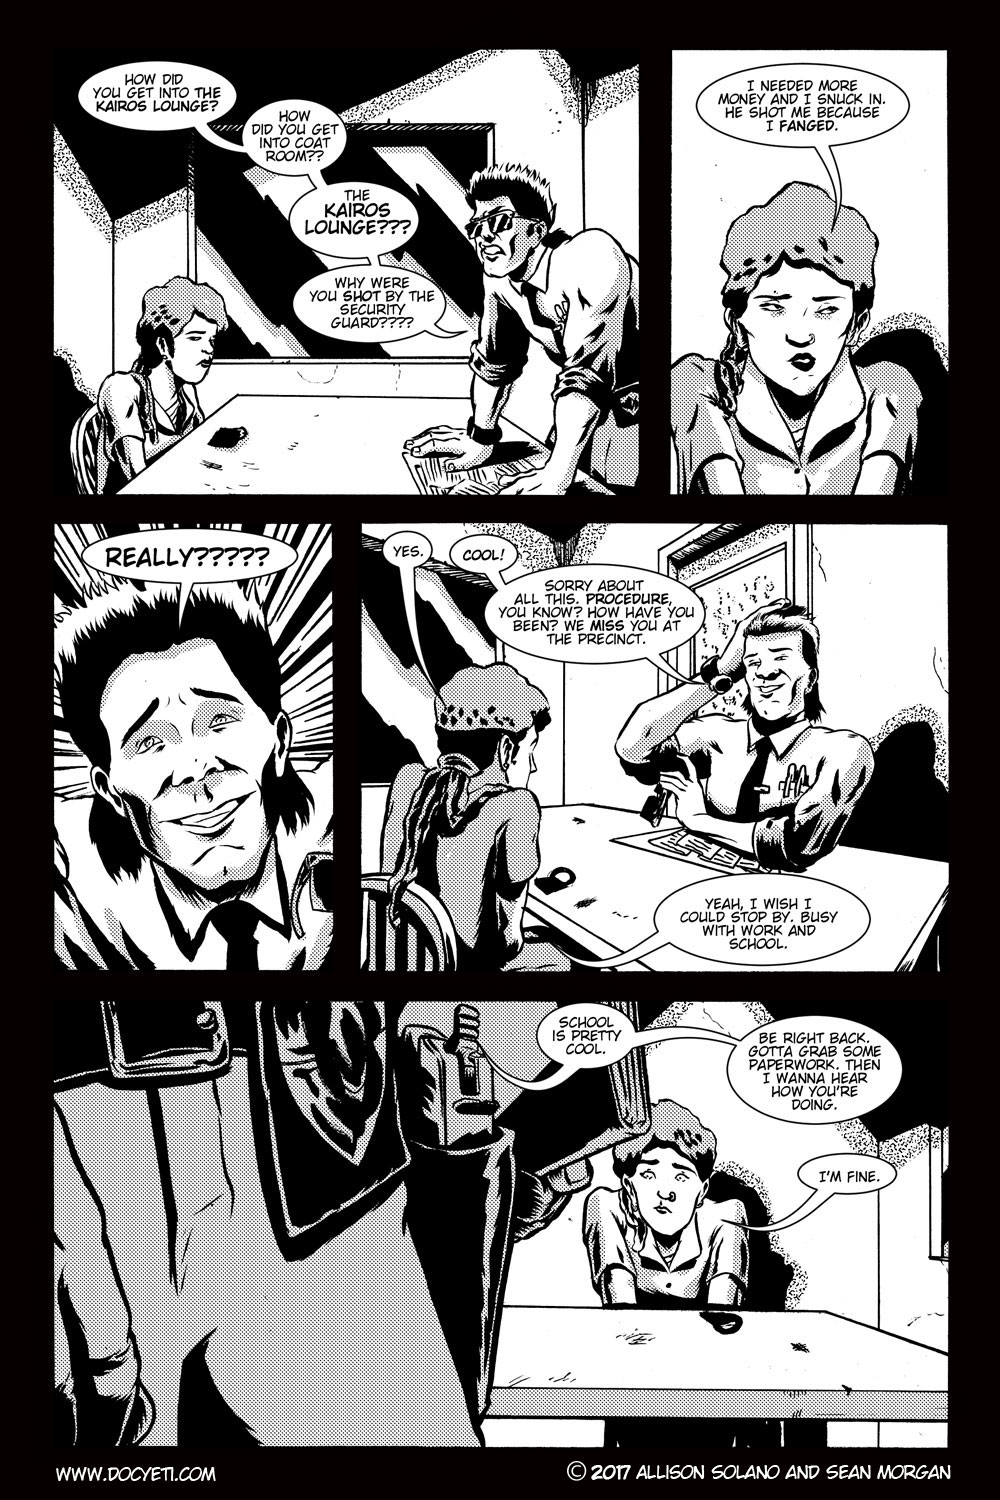 This Yeti for Hire! or the Yeti with the Lace Kerchief! Issue 3 pg.10